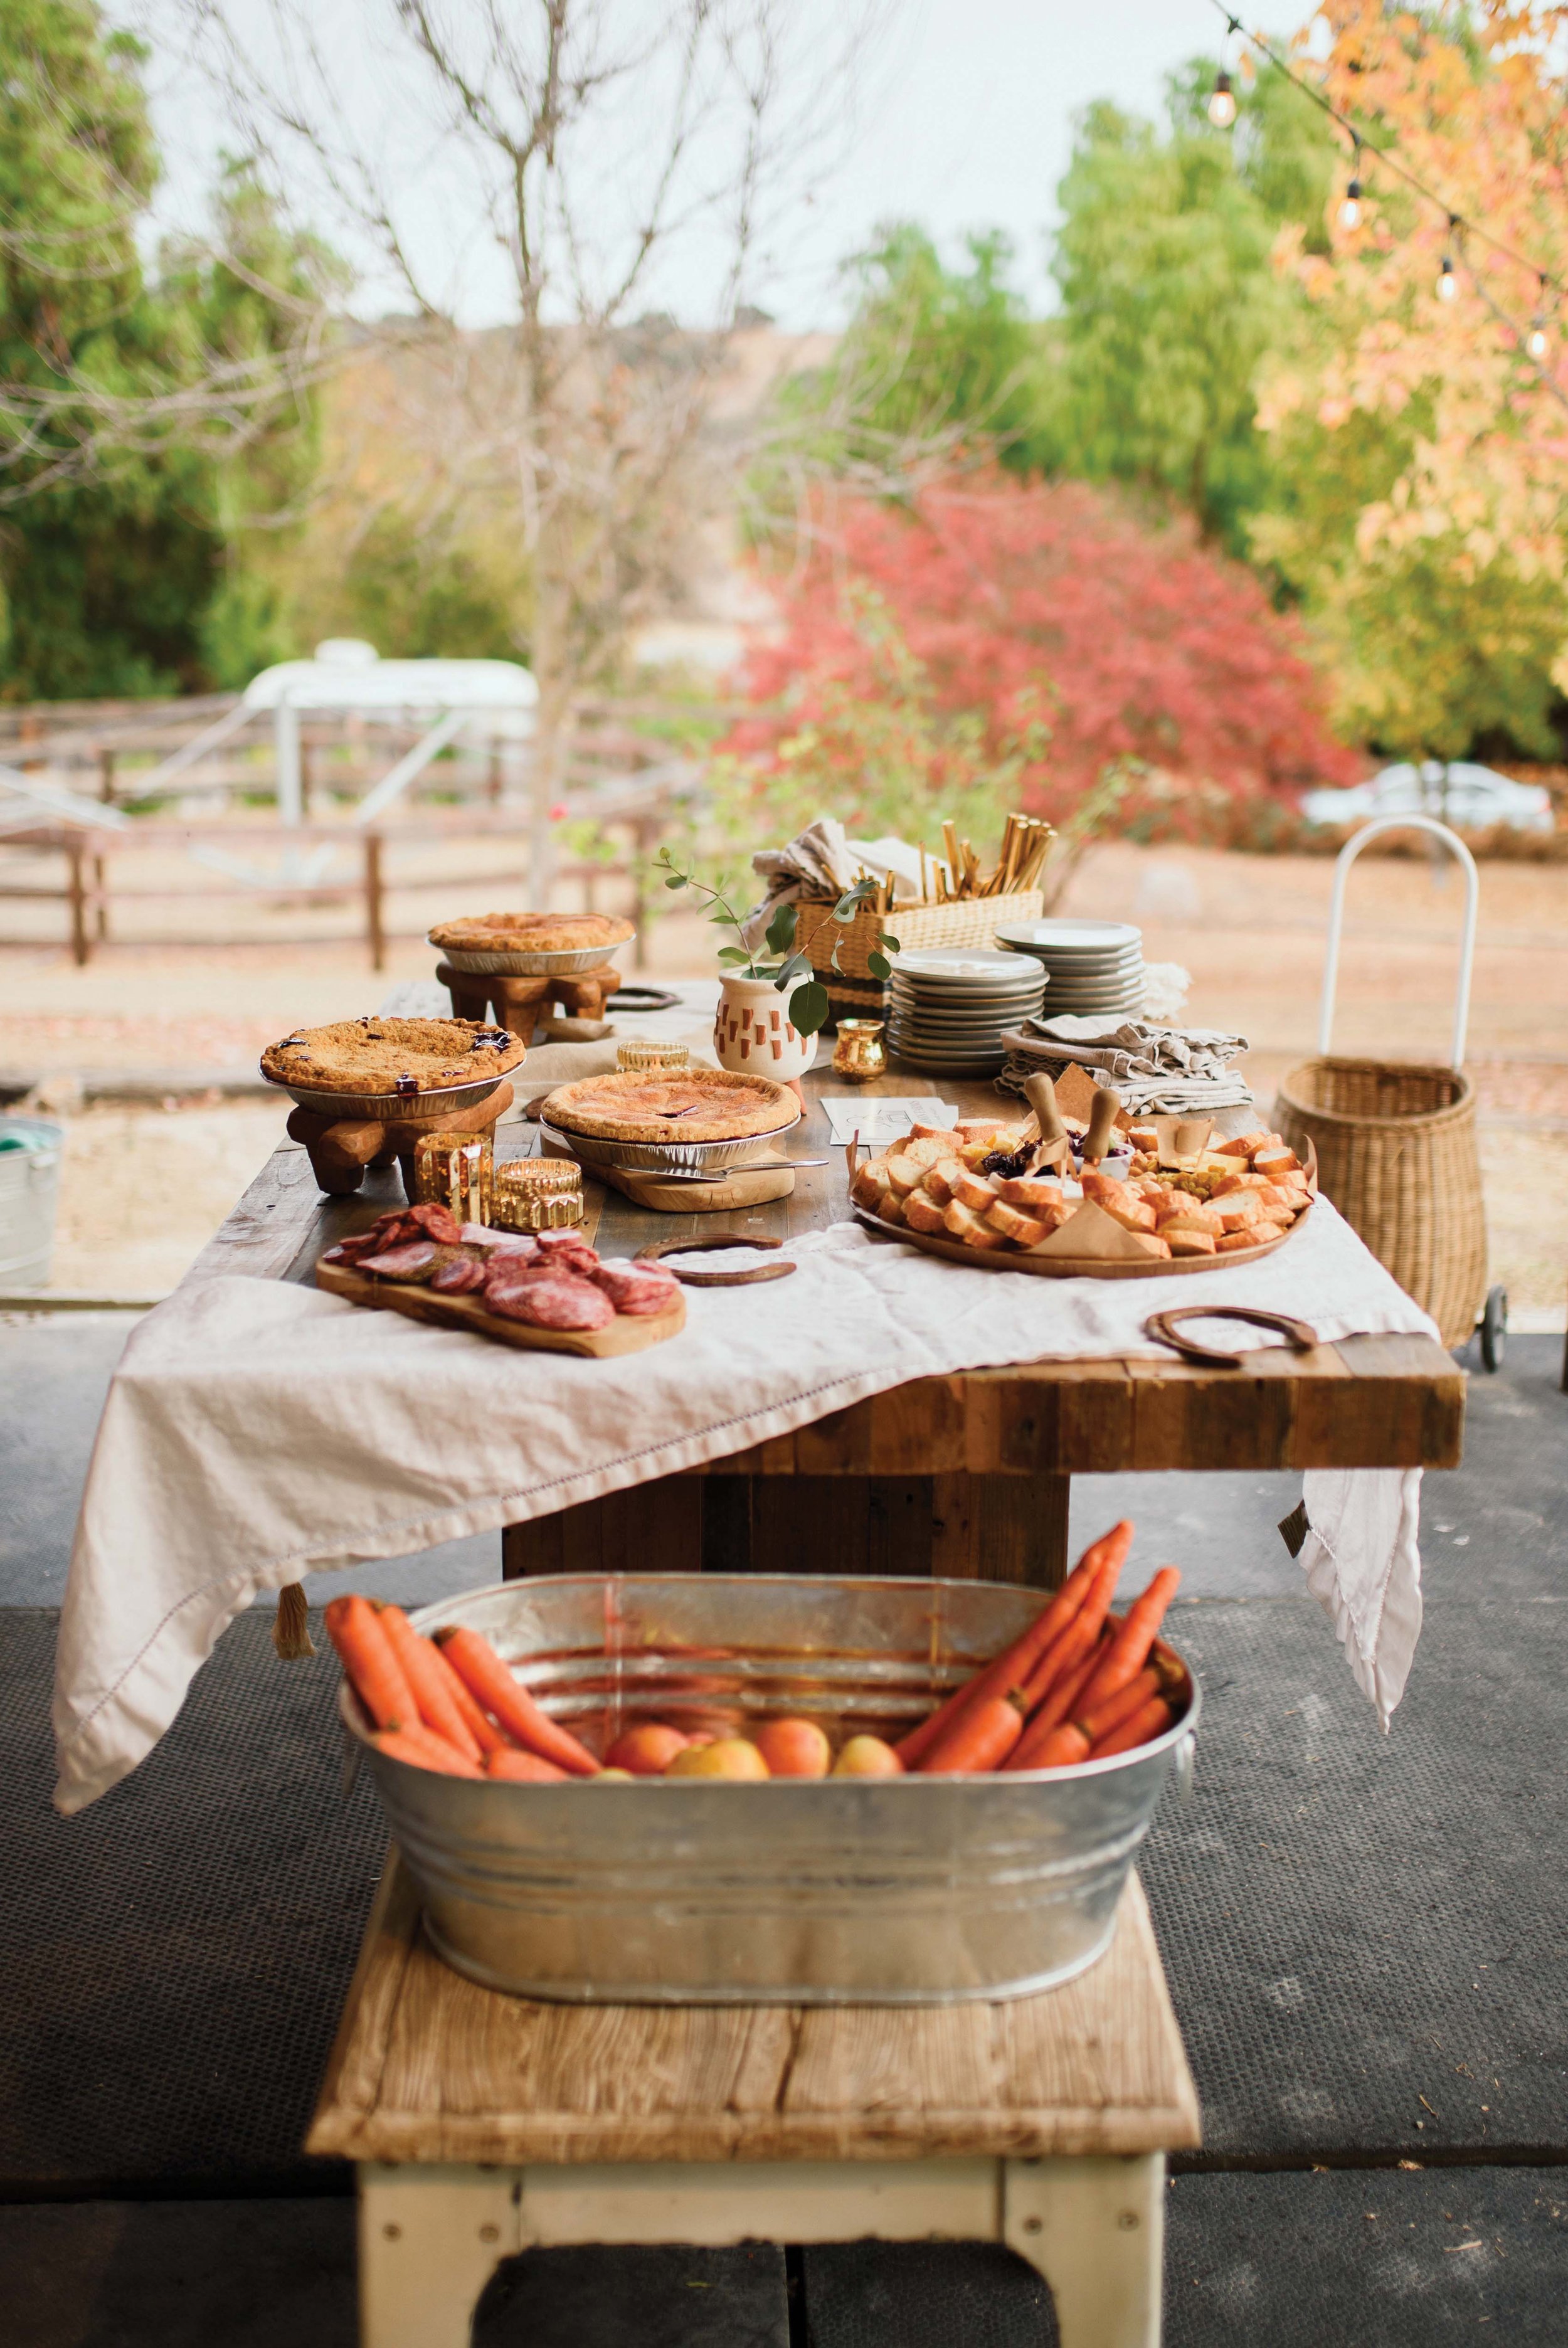  Local pies, produce, and wines are always on the table for Full Moon Farms gatherings. 